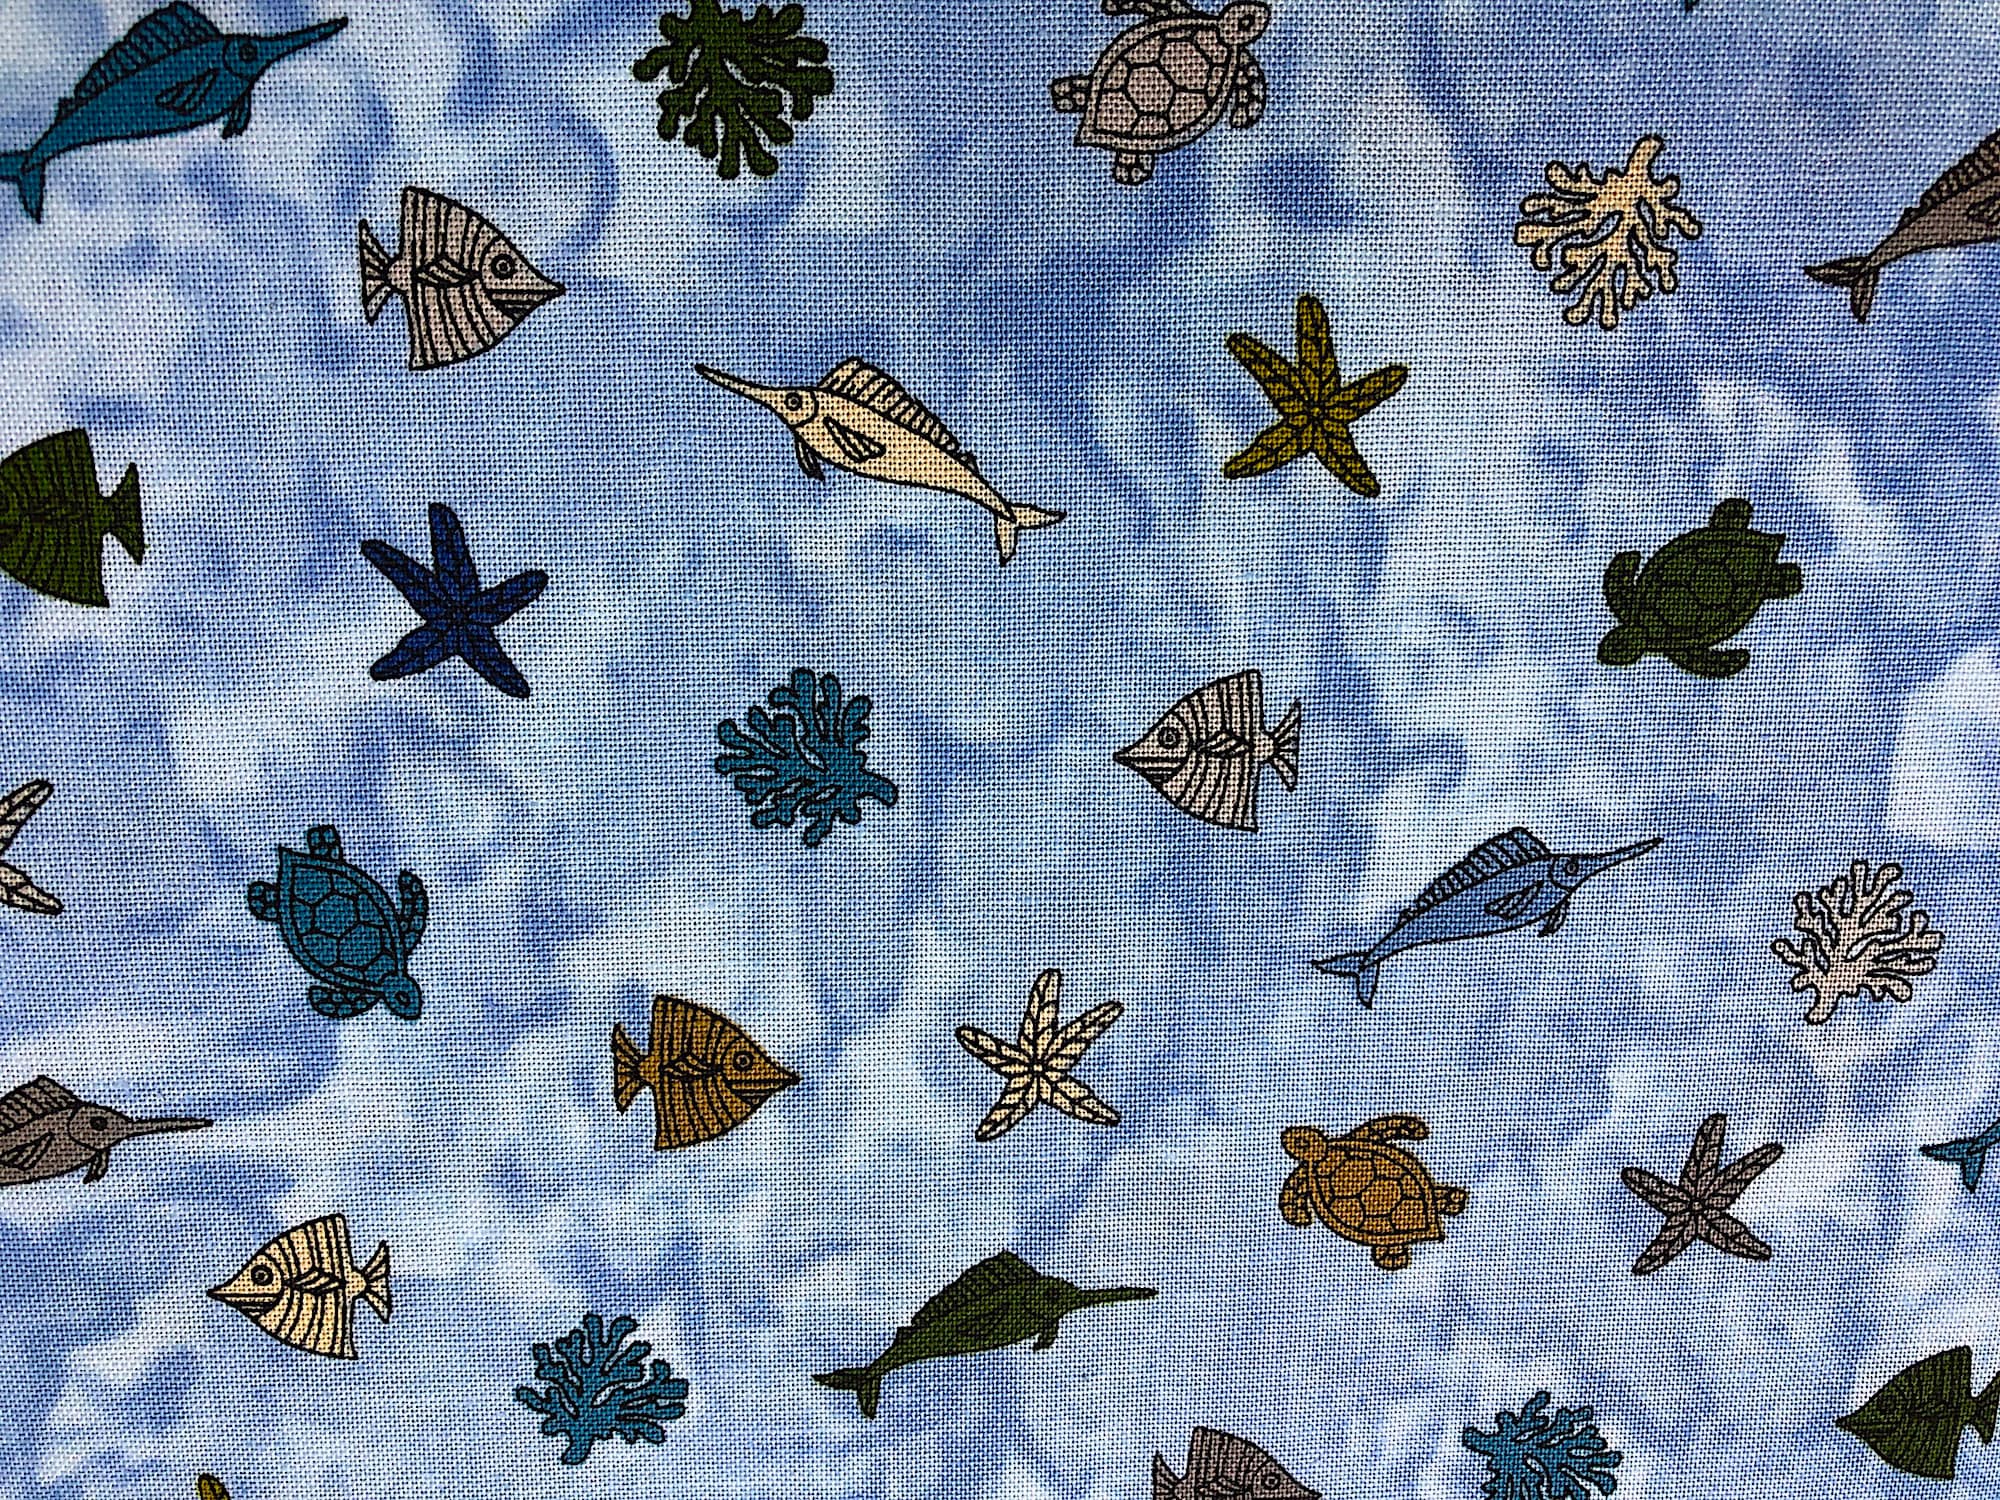 This fabric is part of the Turtle Bay collection and has small turtles, coral and starfish on a blue background.